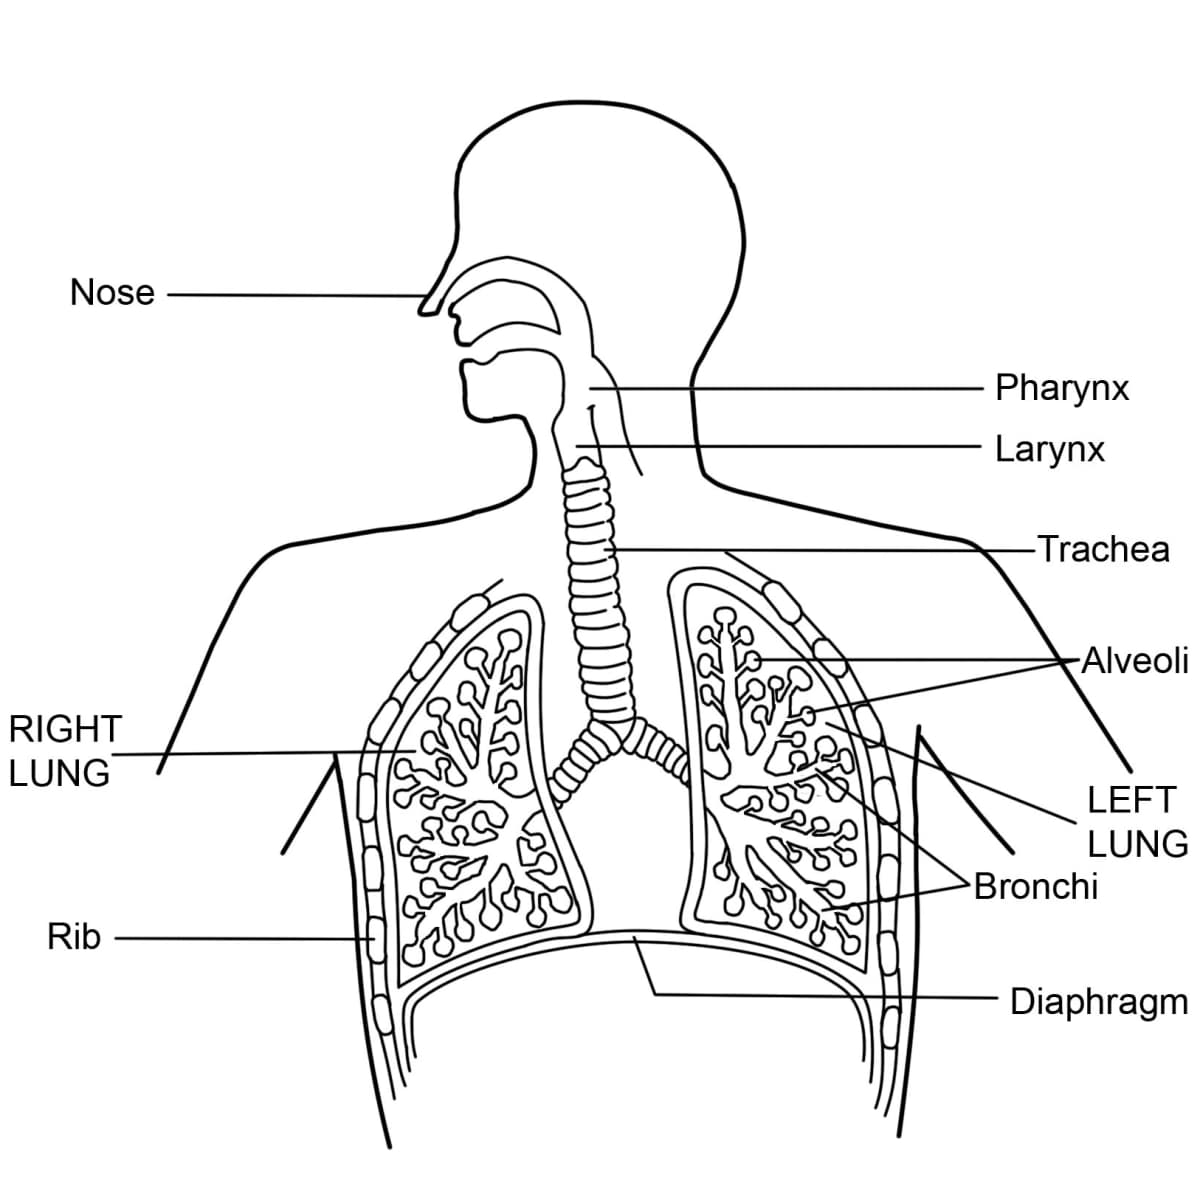 respiratory system diagram labeled with functions